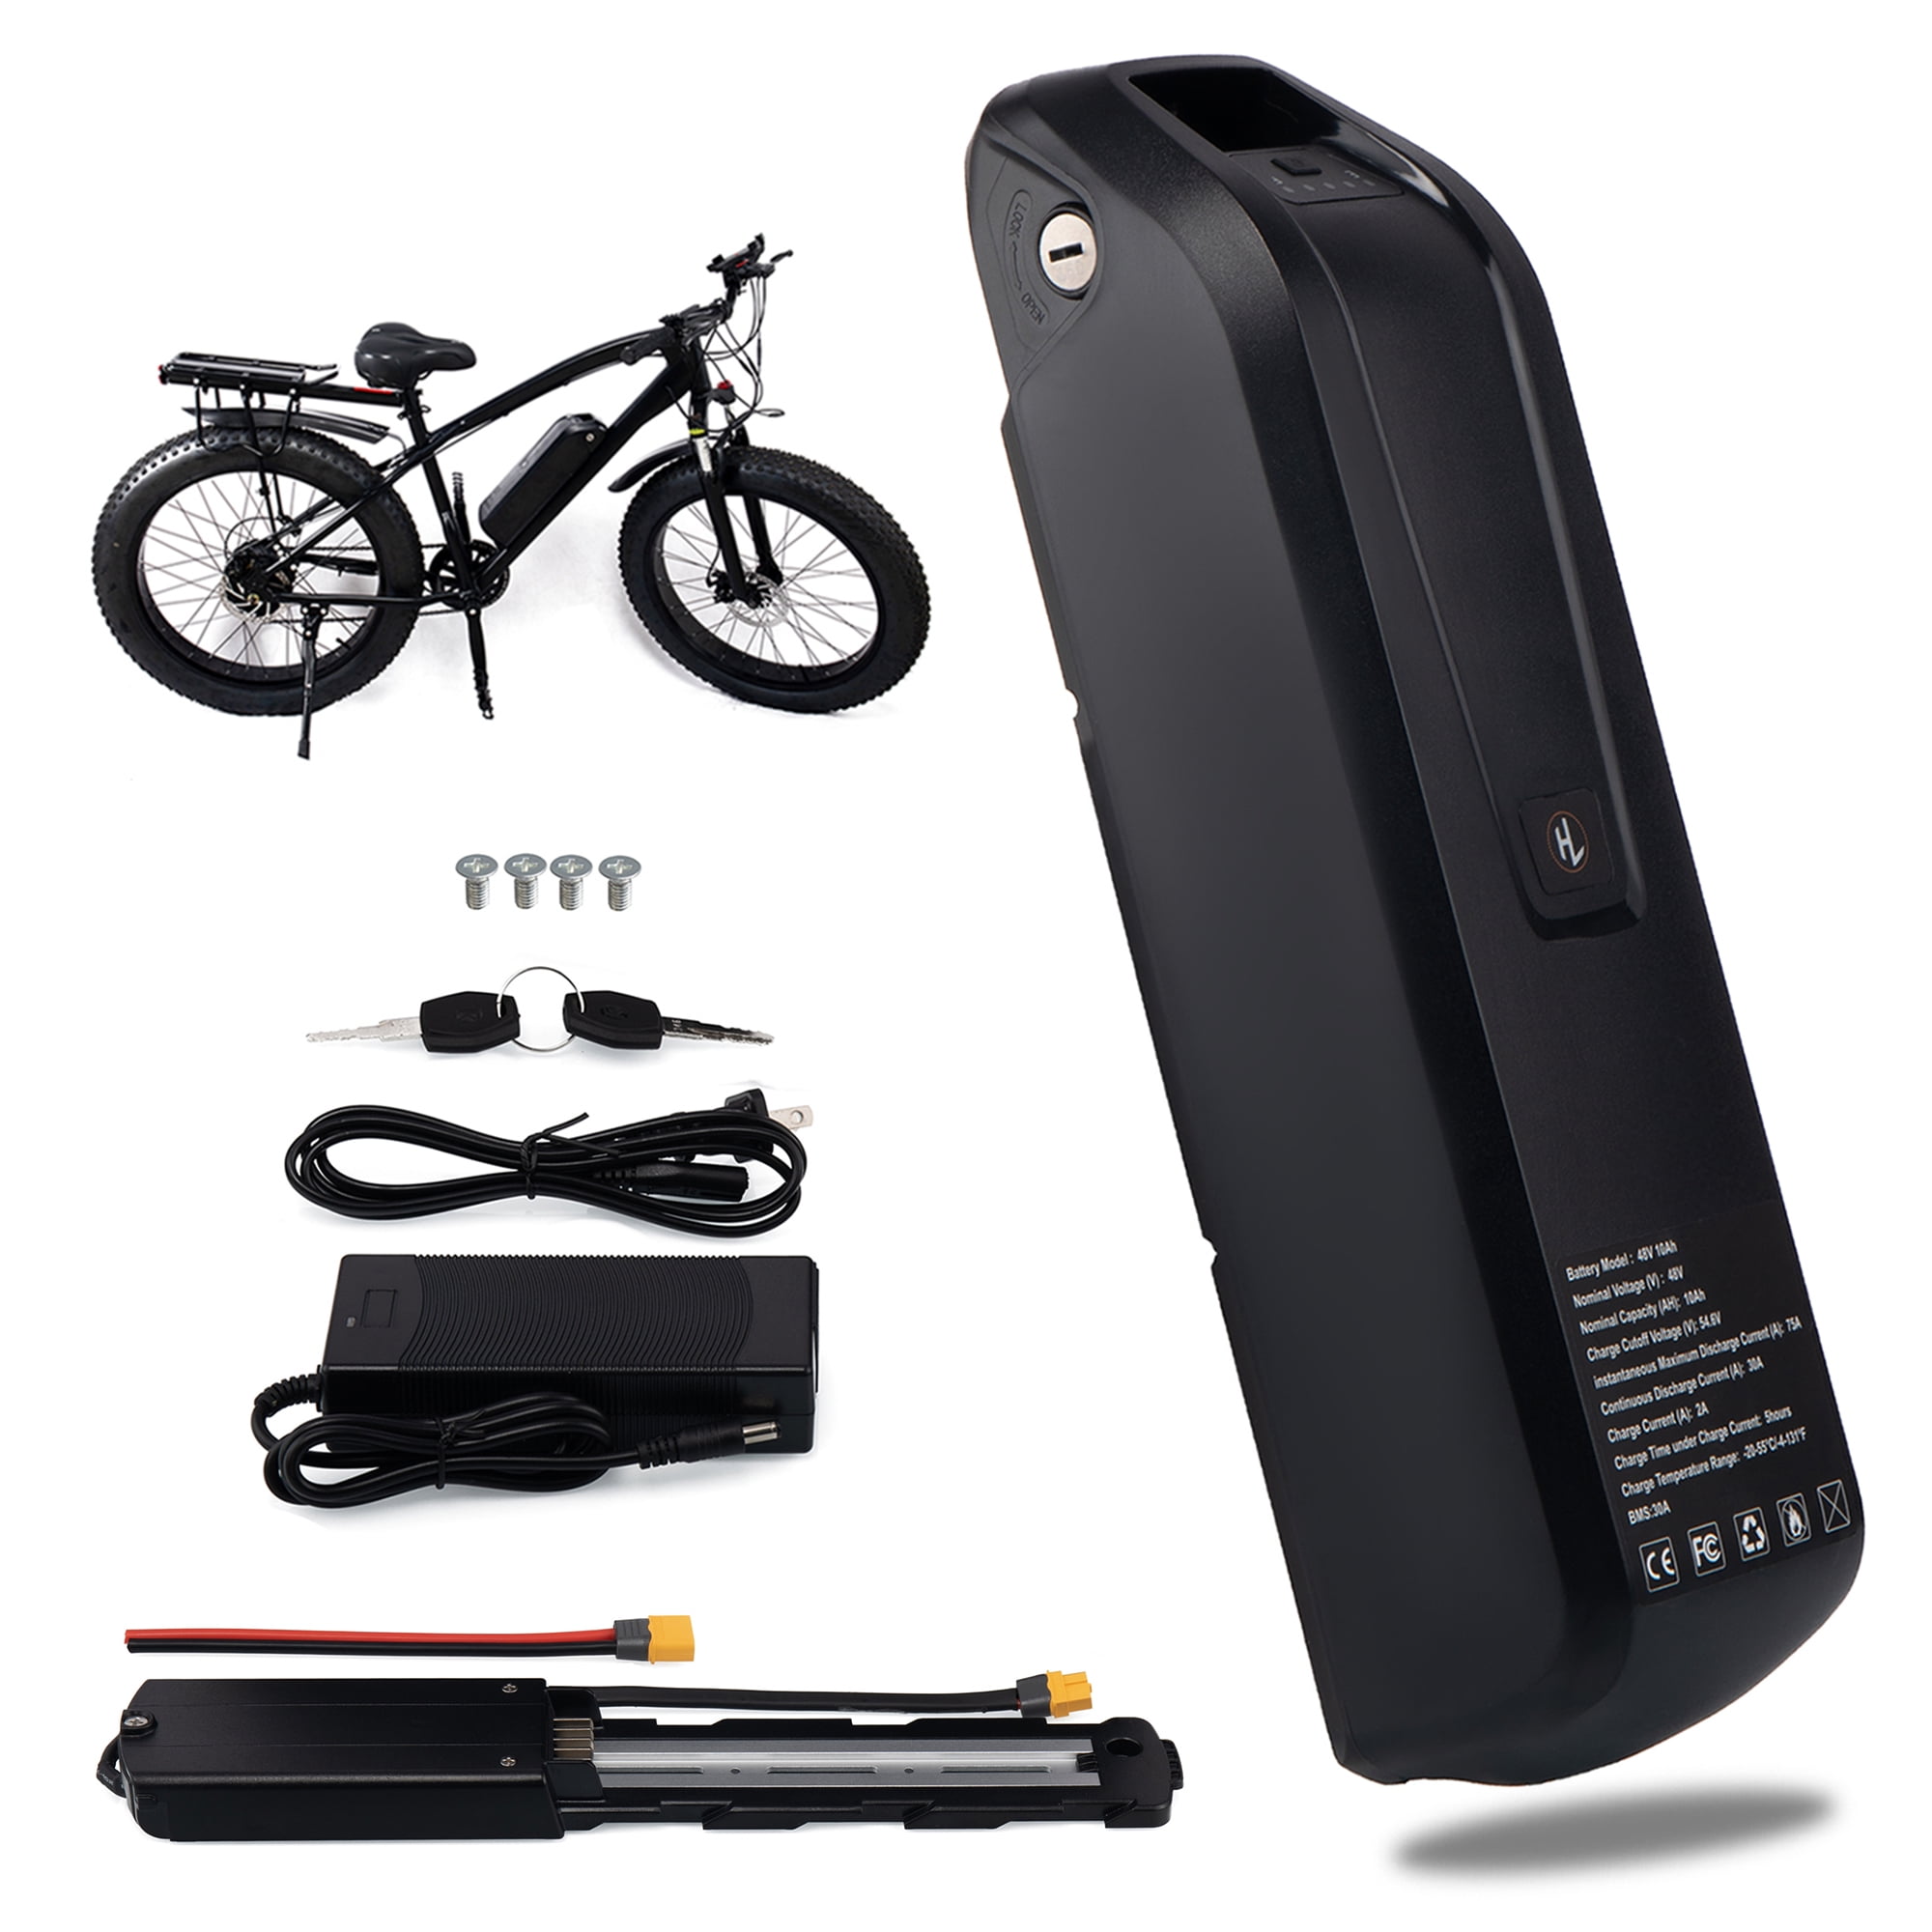 High Performance Lithium Ebike 48v Lithium Ion Battery Set Rear Rack  Electric Bike Akku 36V/48V Available In 10Ah To 20Ah 1000W To 1500W EU/US  Stock From Tyxfight, $234.43